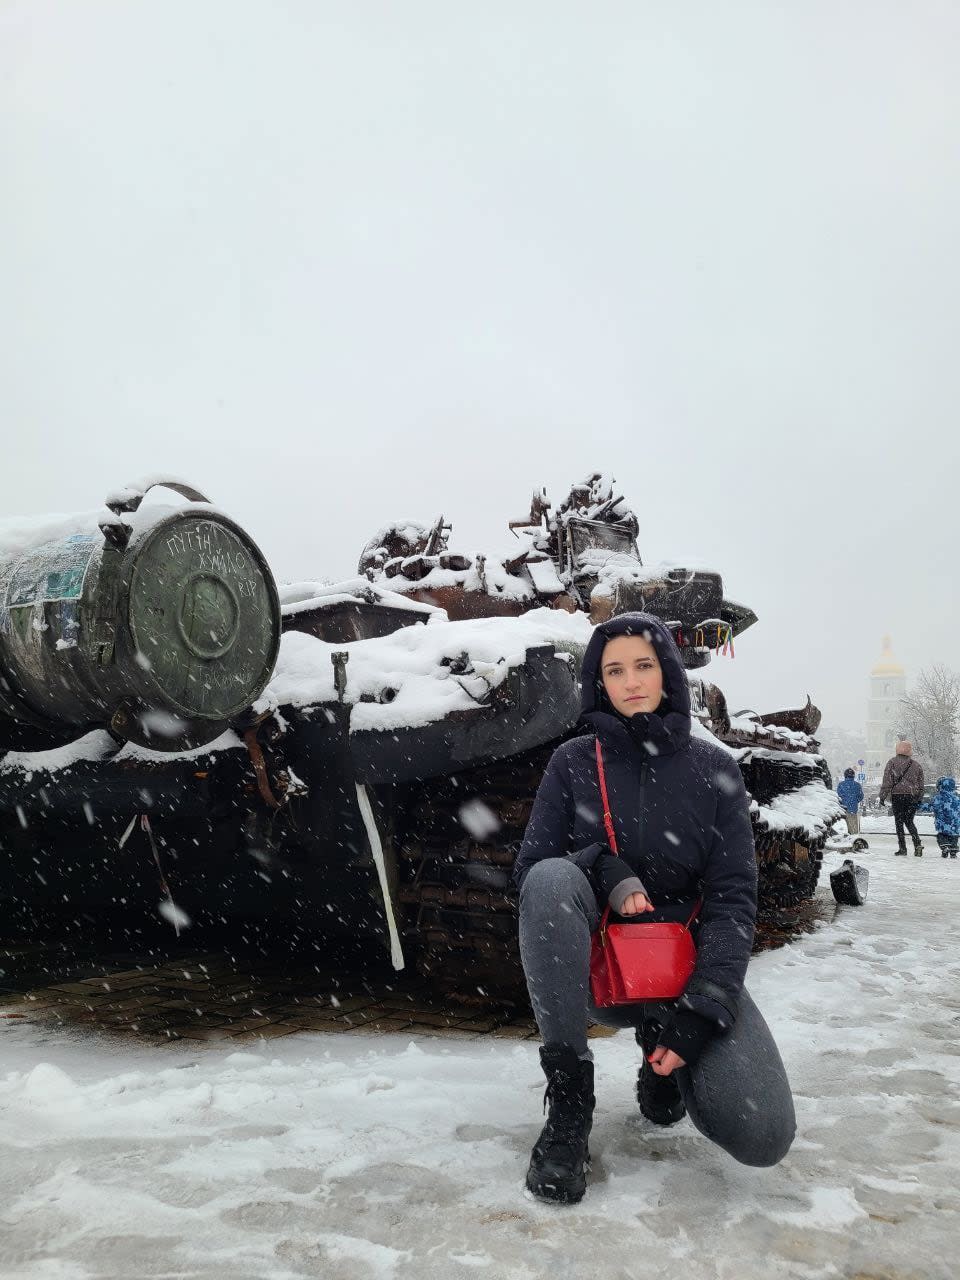 Sakhnatska kneeling by a destroyed Russian tank in central Kyiv when she returned to Ukraine the first time during the war, in November 2022.